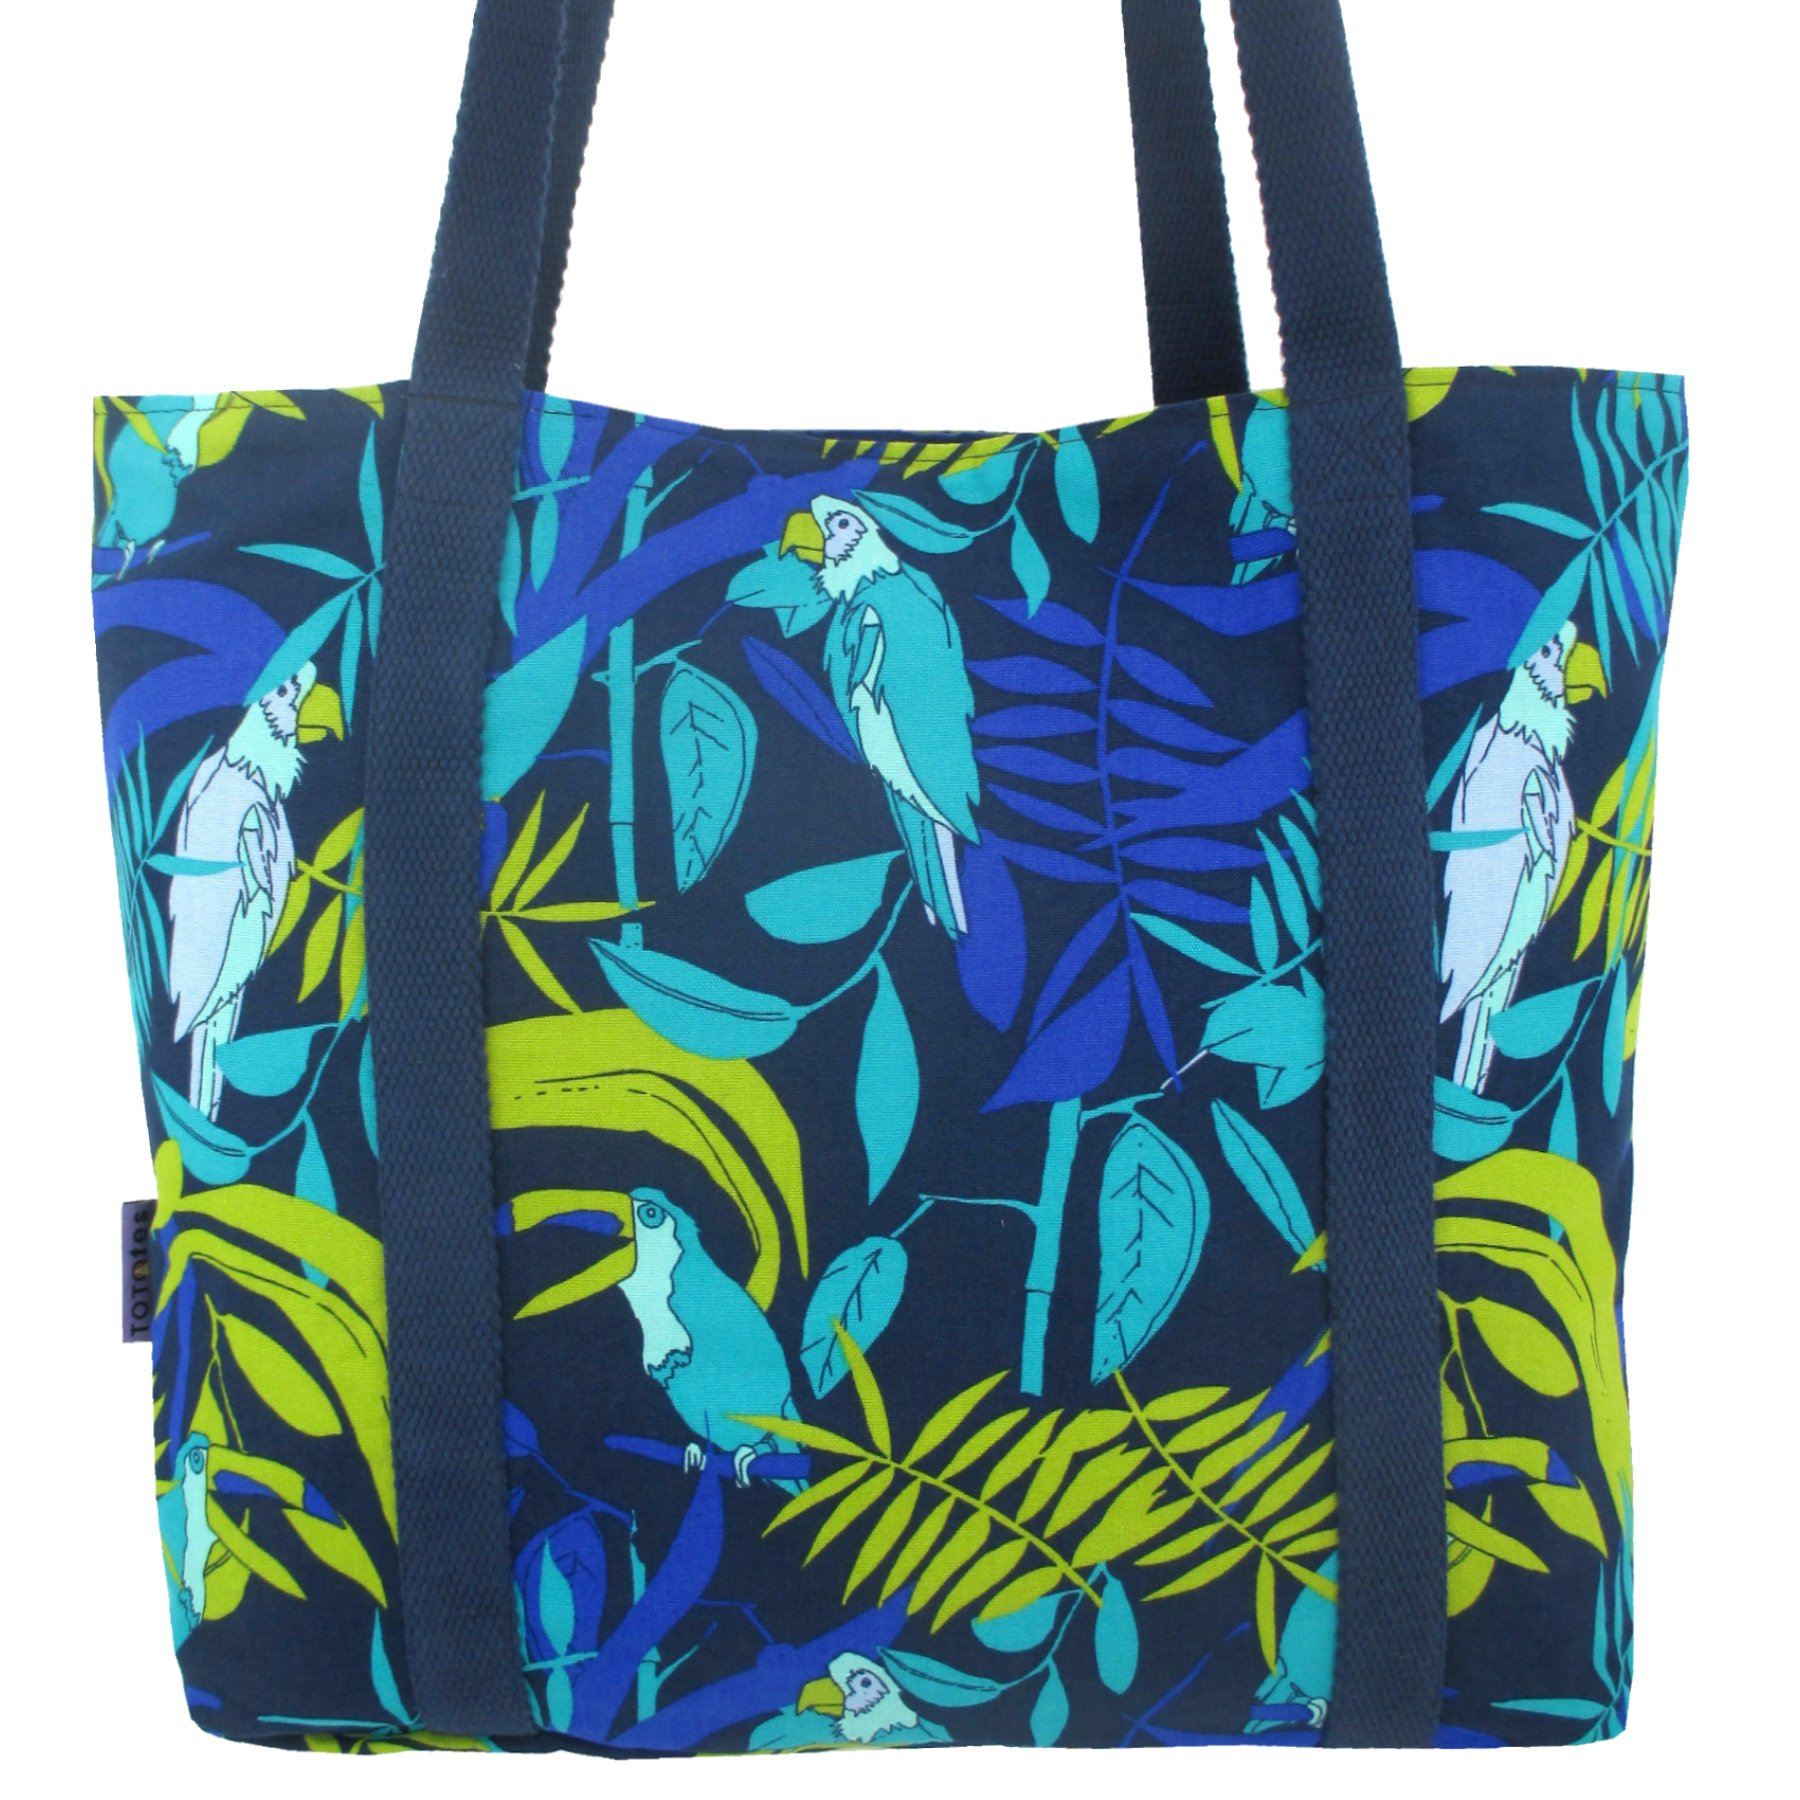 Colorful Desert Animal Themed Toucan Parrot Macaw Cactus Print Large Tote Bag